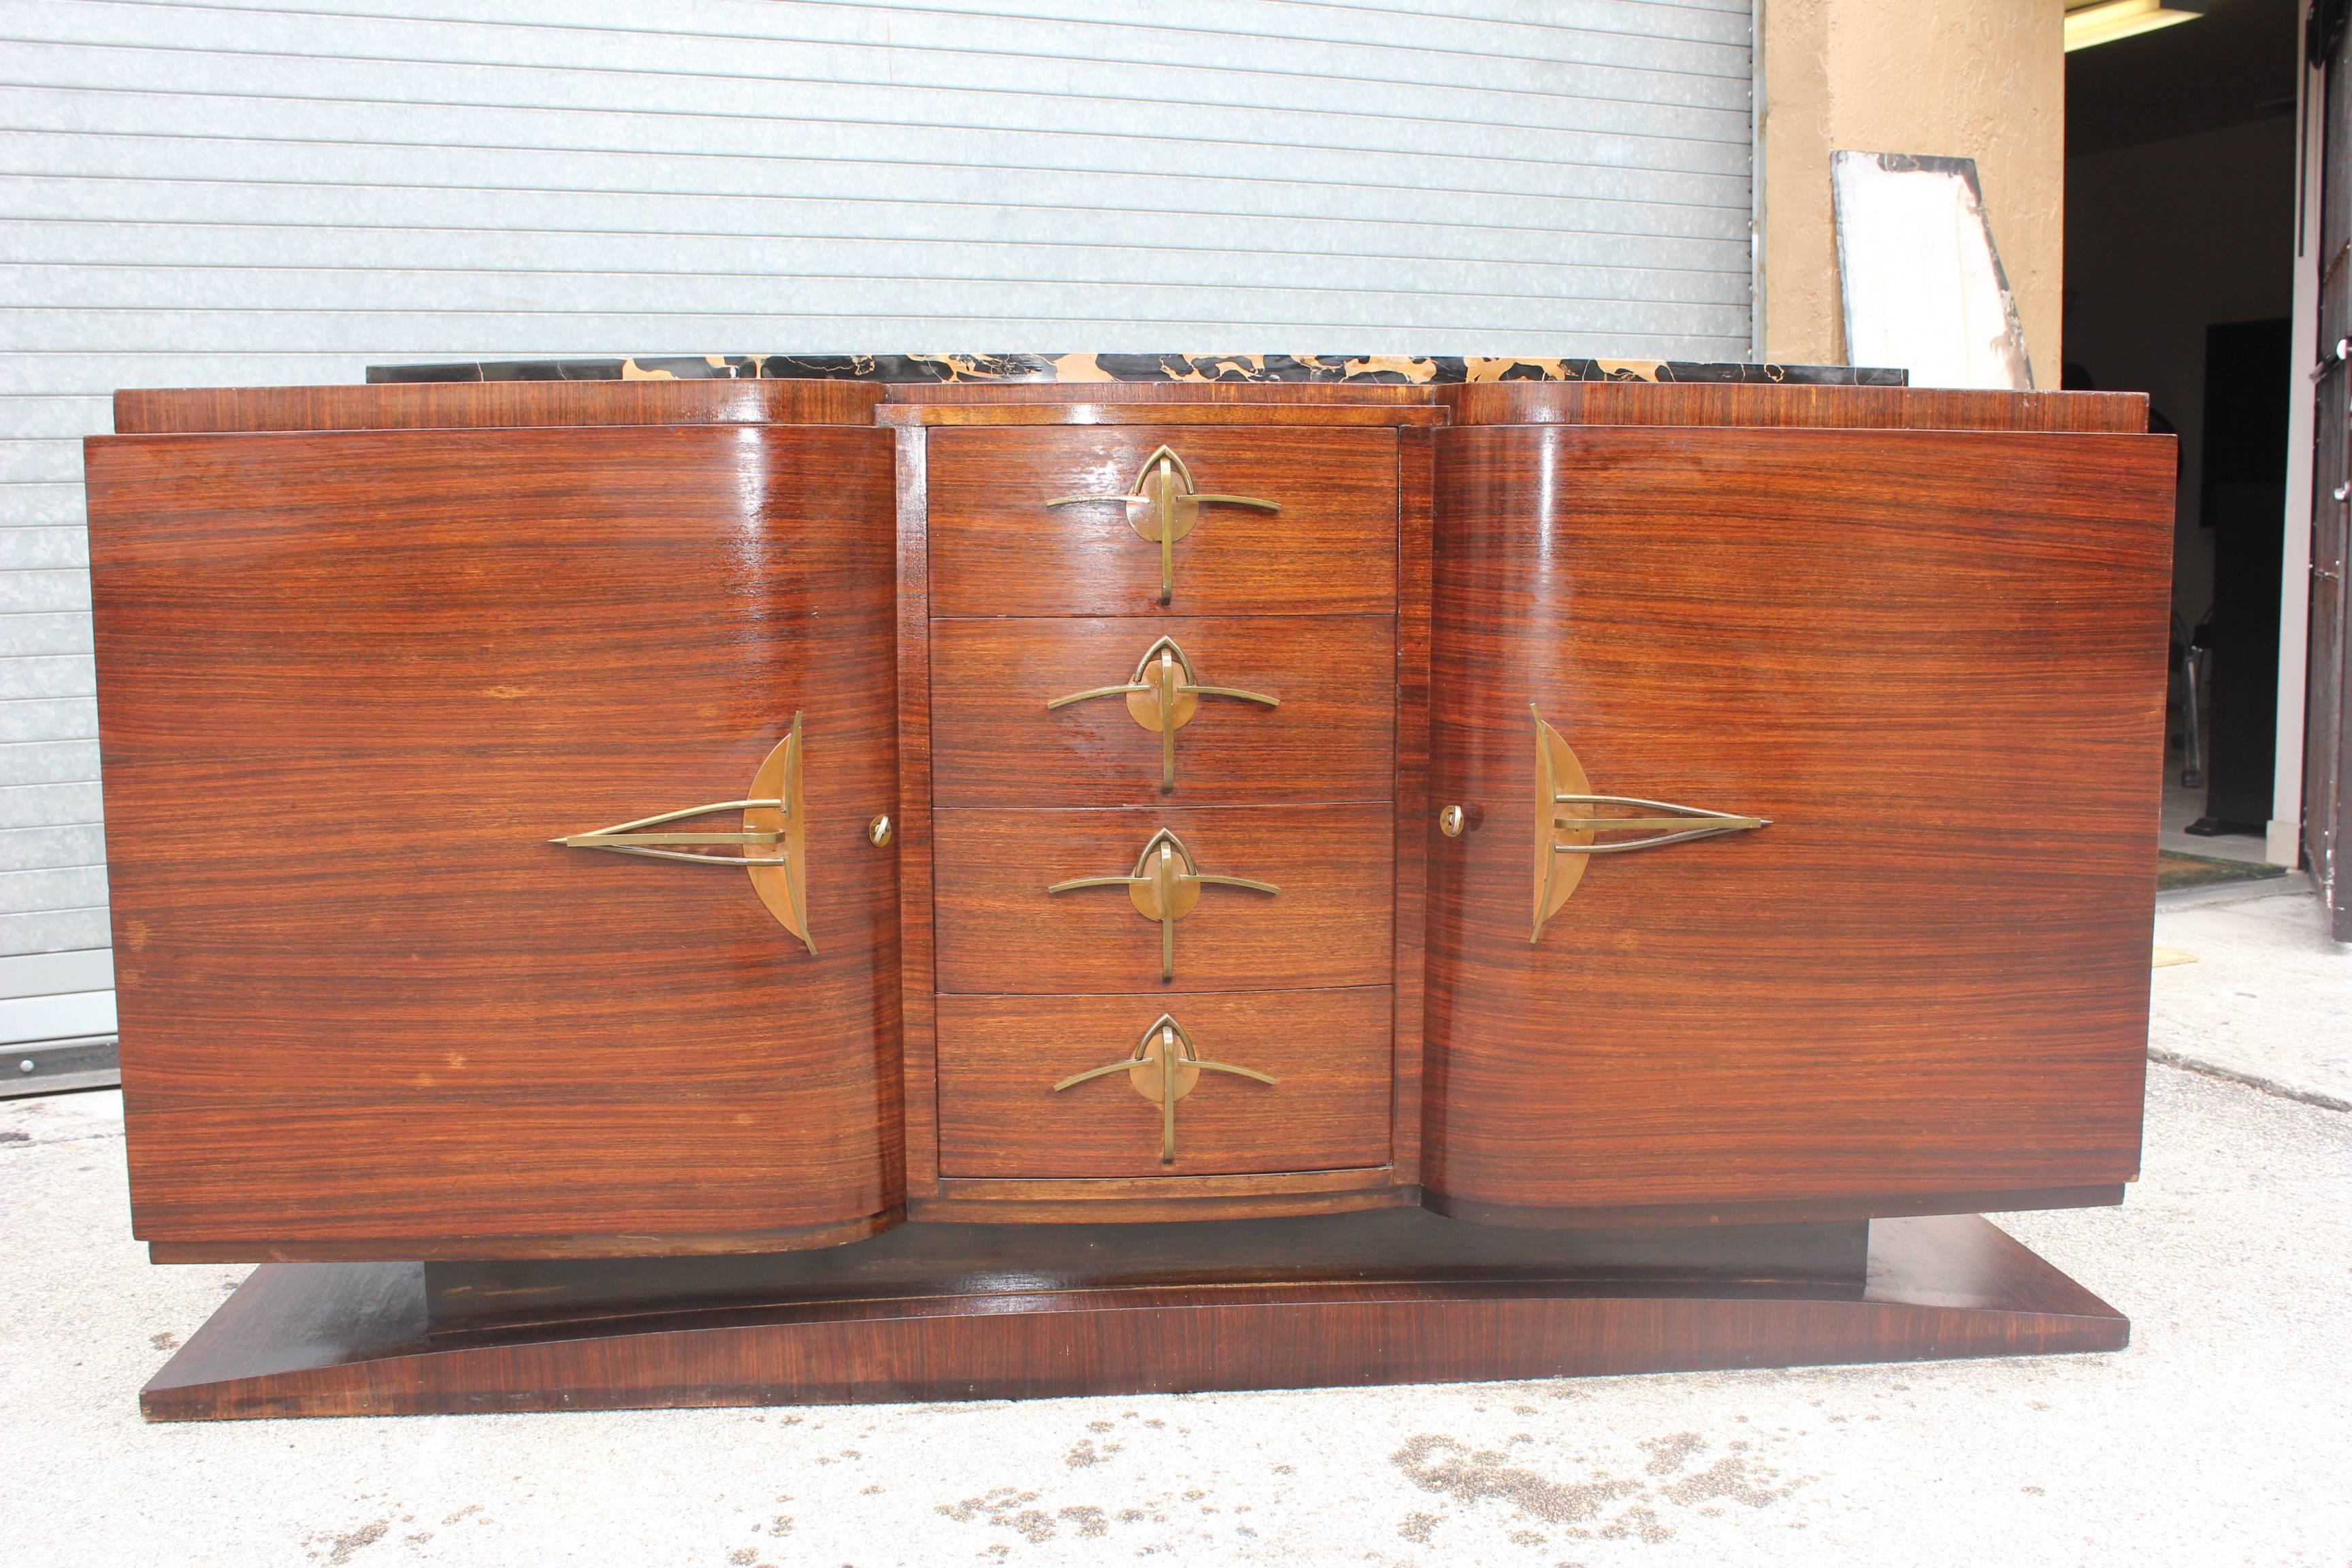 A Classic French Art Deco   Exotic Macassar Ebony sideboard / buffet with black Porto marble top, circa 1940s. The most elaborate deco hardware.(with the original finish in very good condition. )